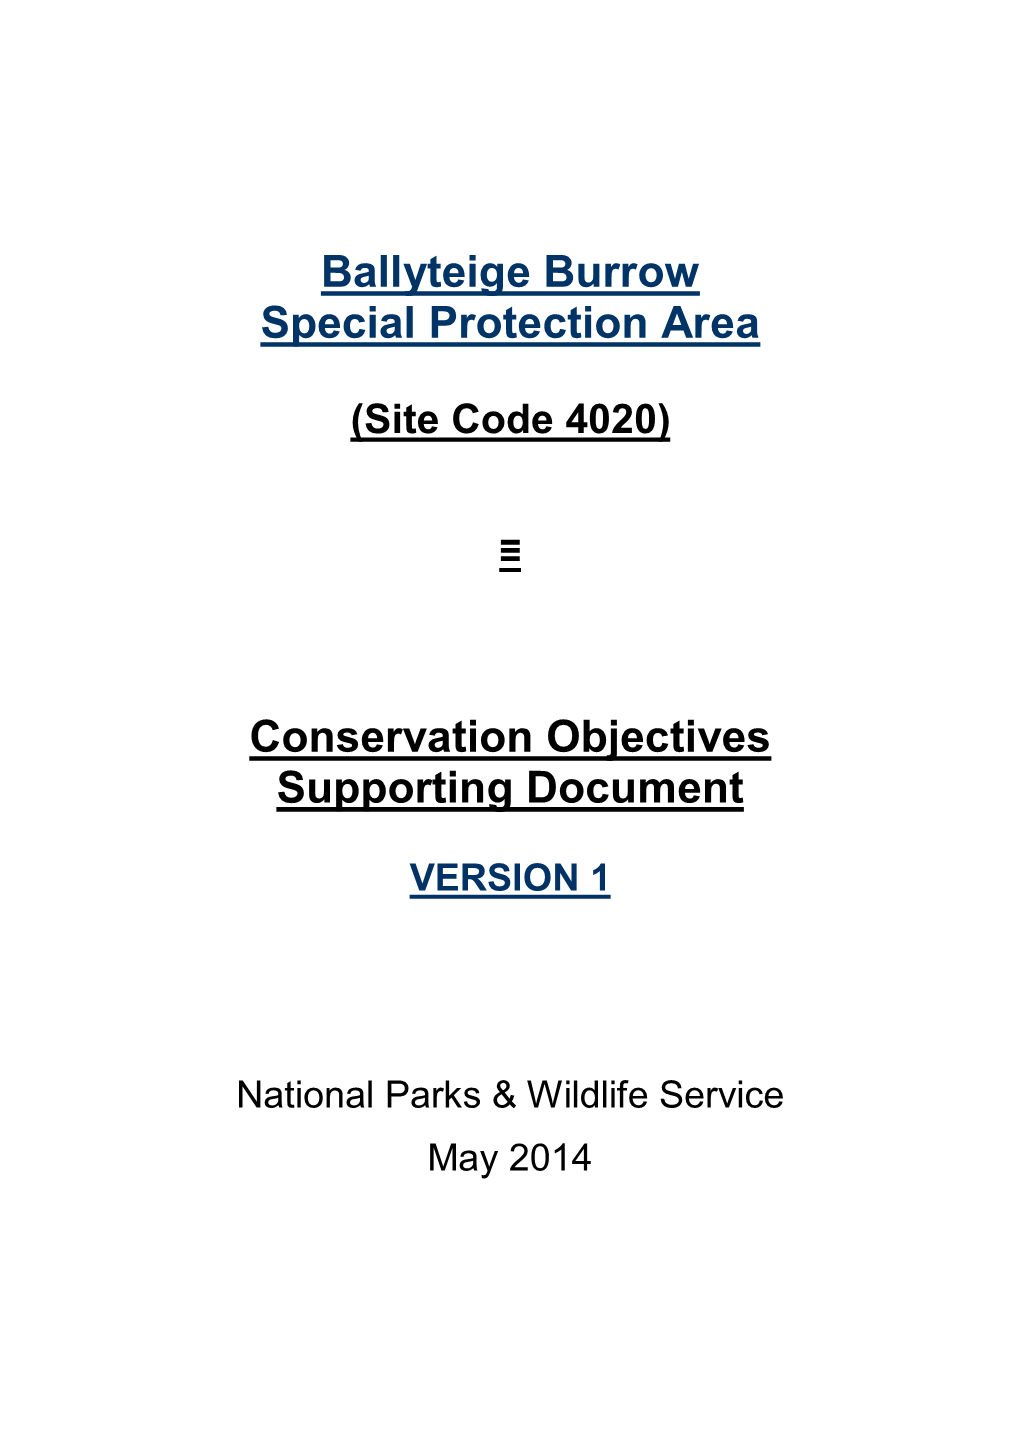 Ballyteige Burrow Special Protection Area Conservation Objectives